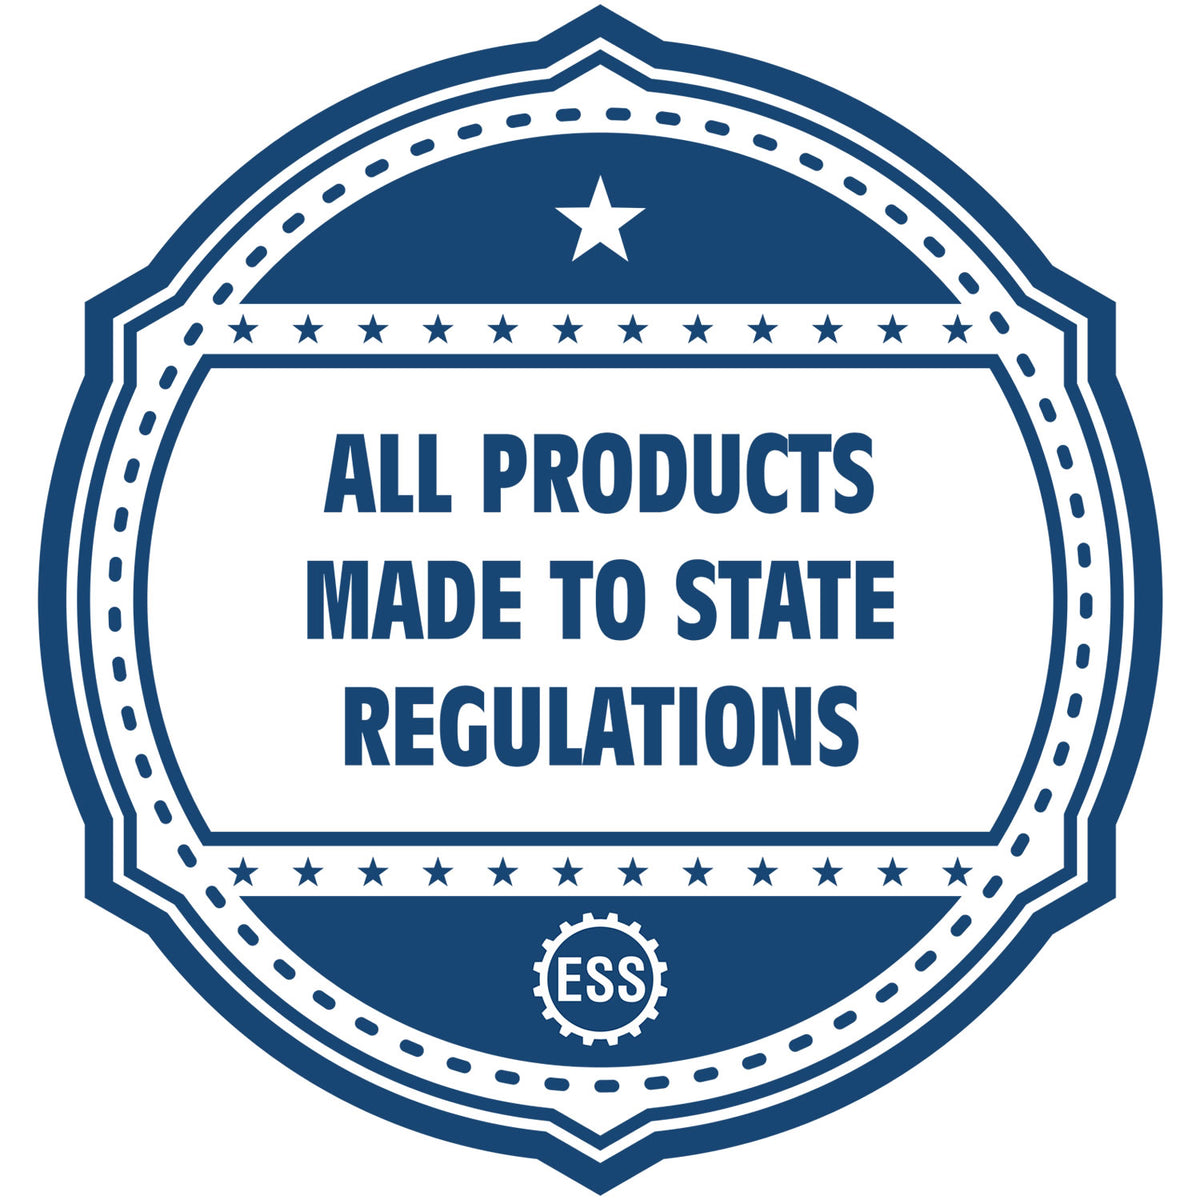 An icon or badge element for the Premium MaxLight Pre-Inked South Dakota Landscape Architectural Stamp showing that this product is made in compliance with state regulations.